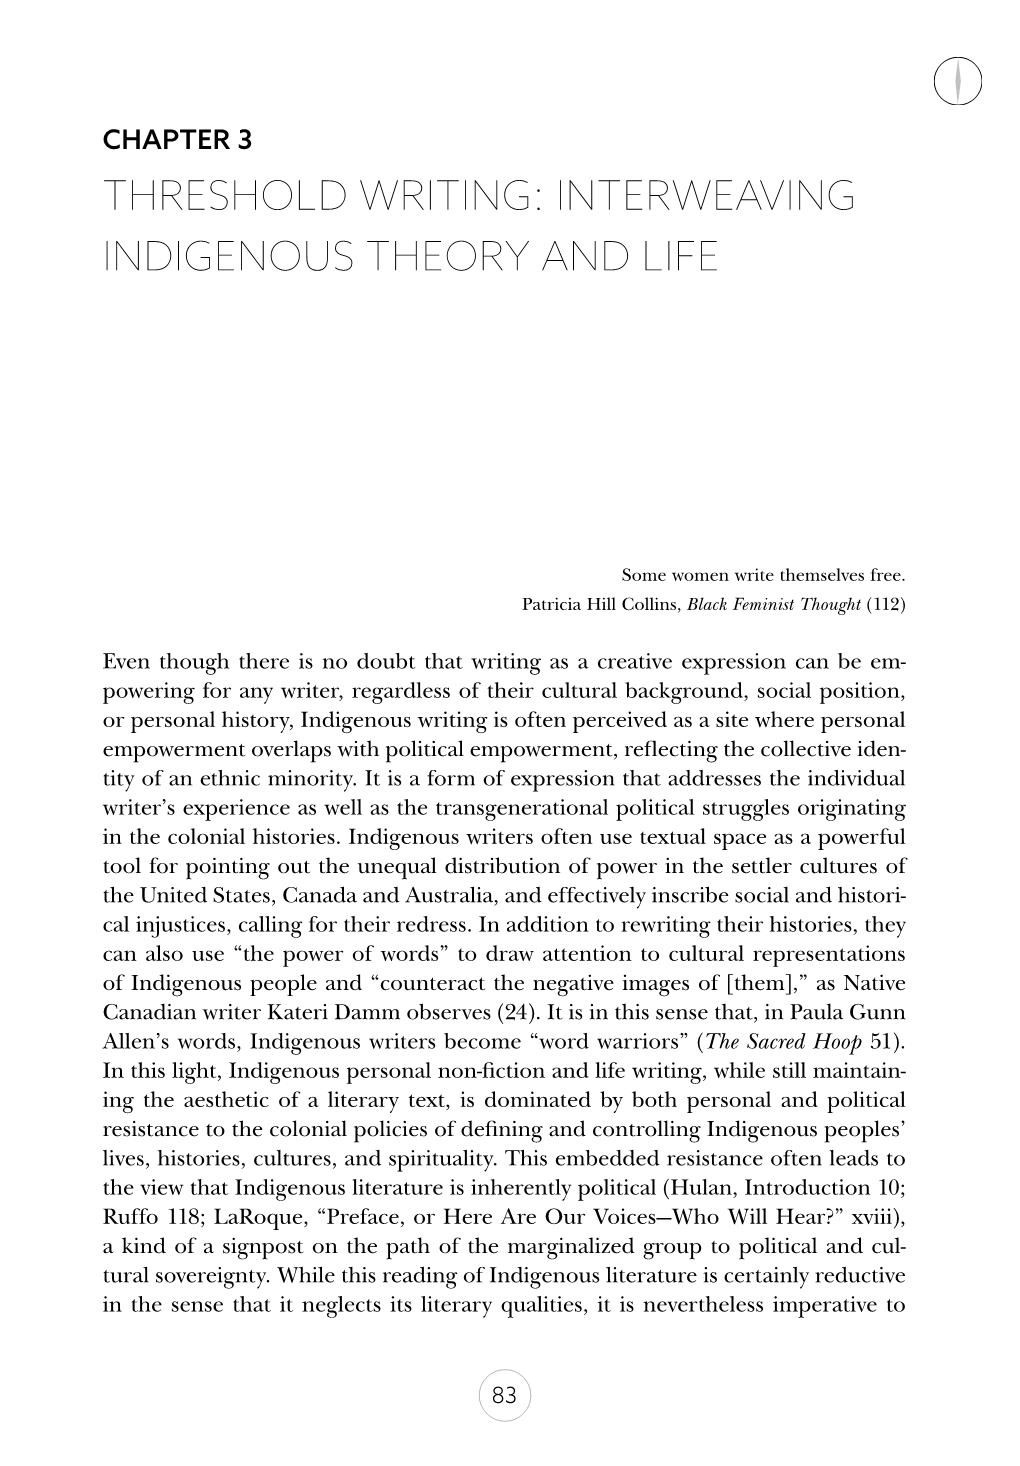 Interweaving Indigenous Theory and Life